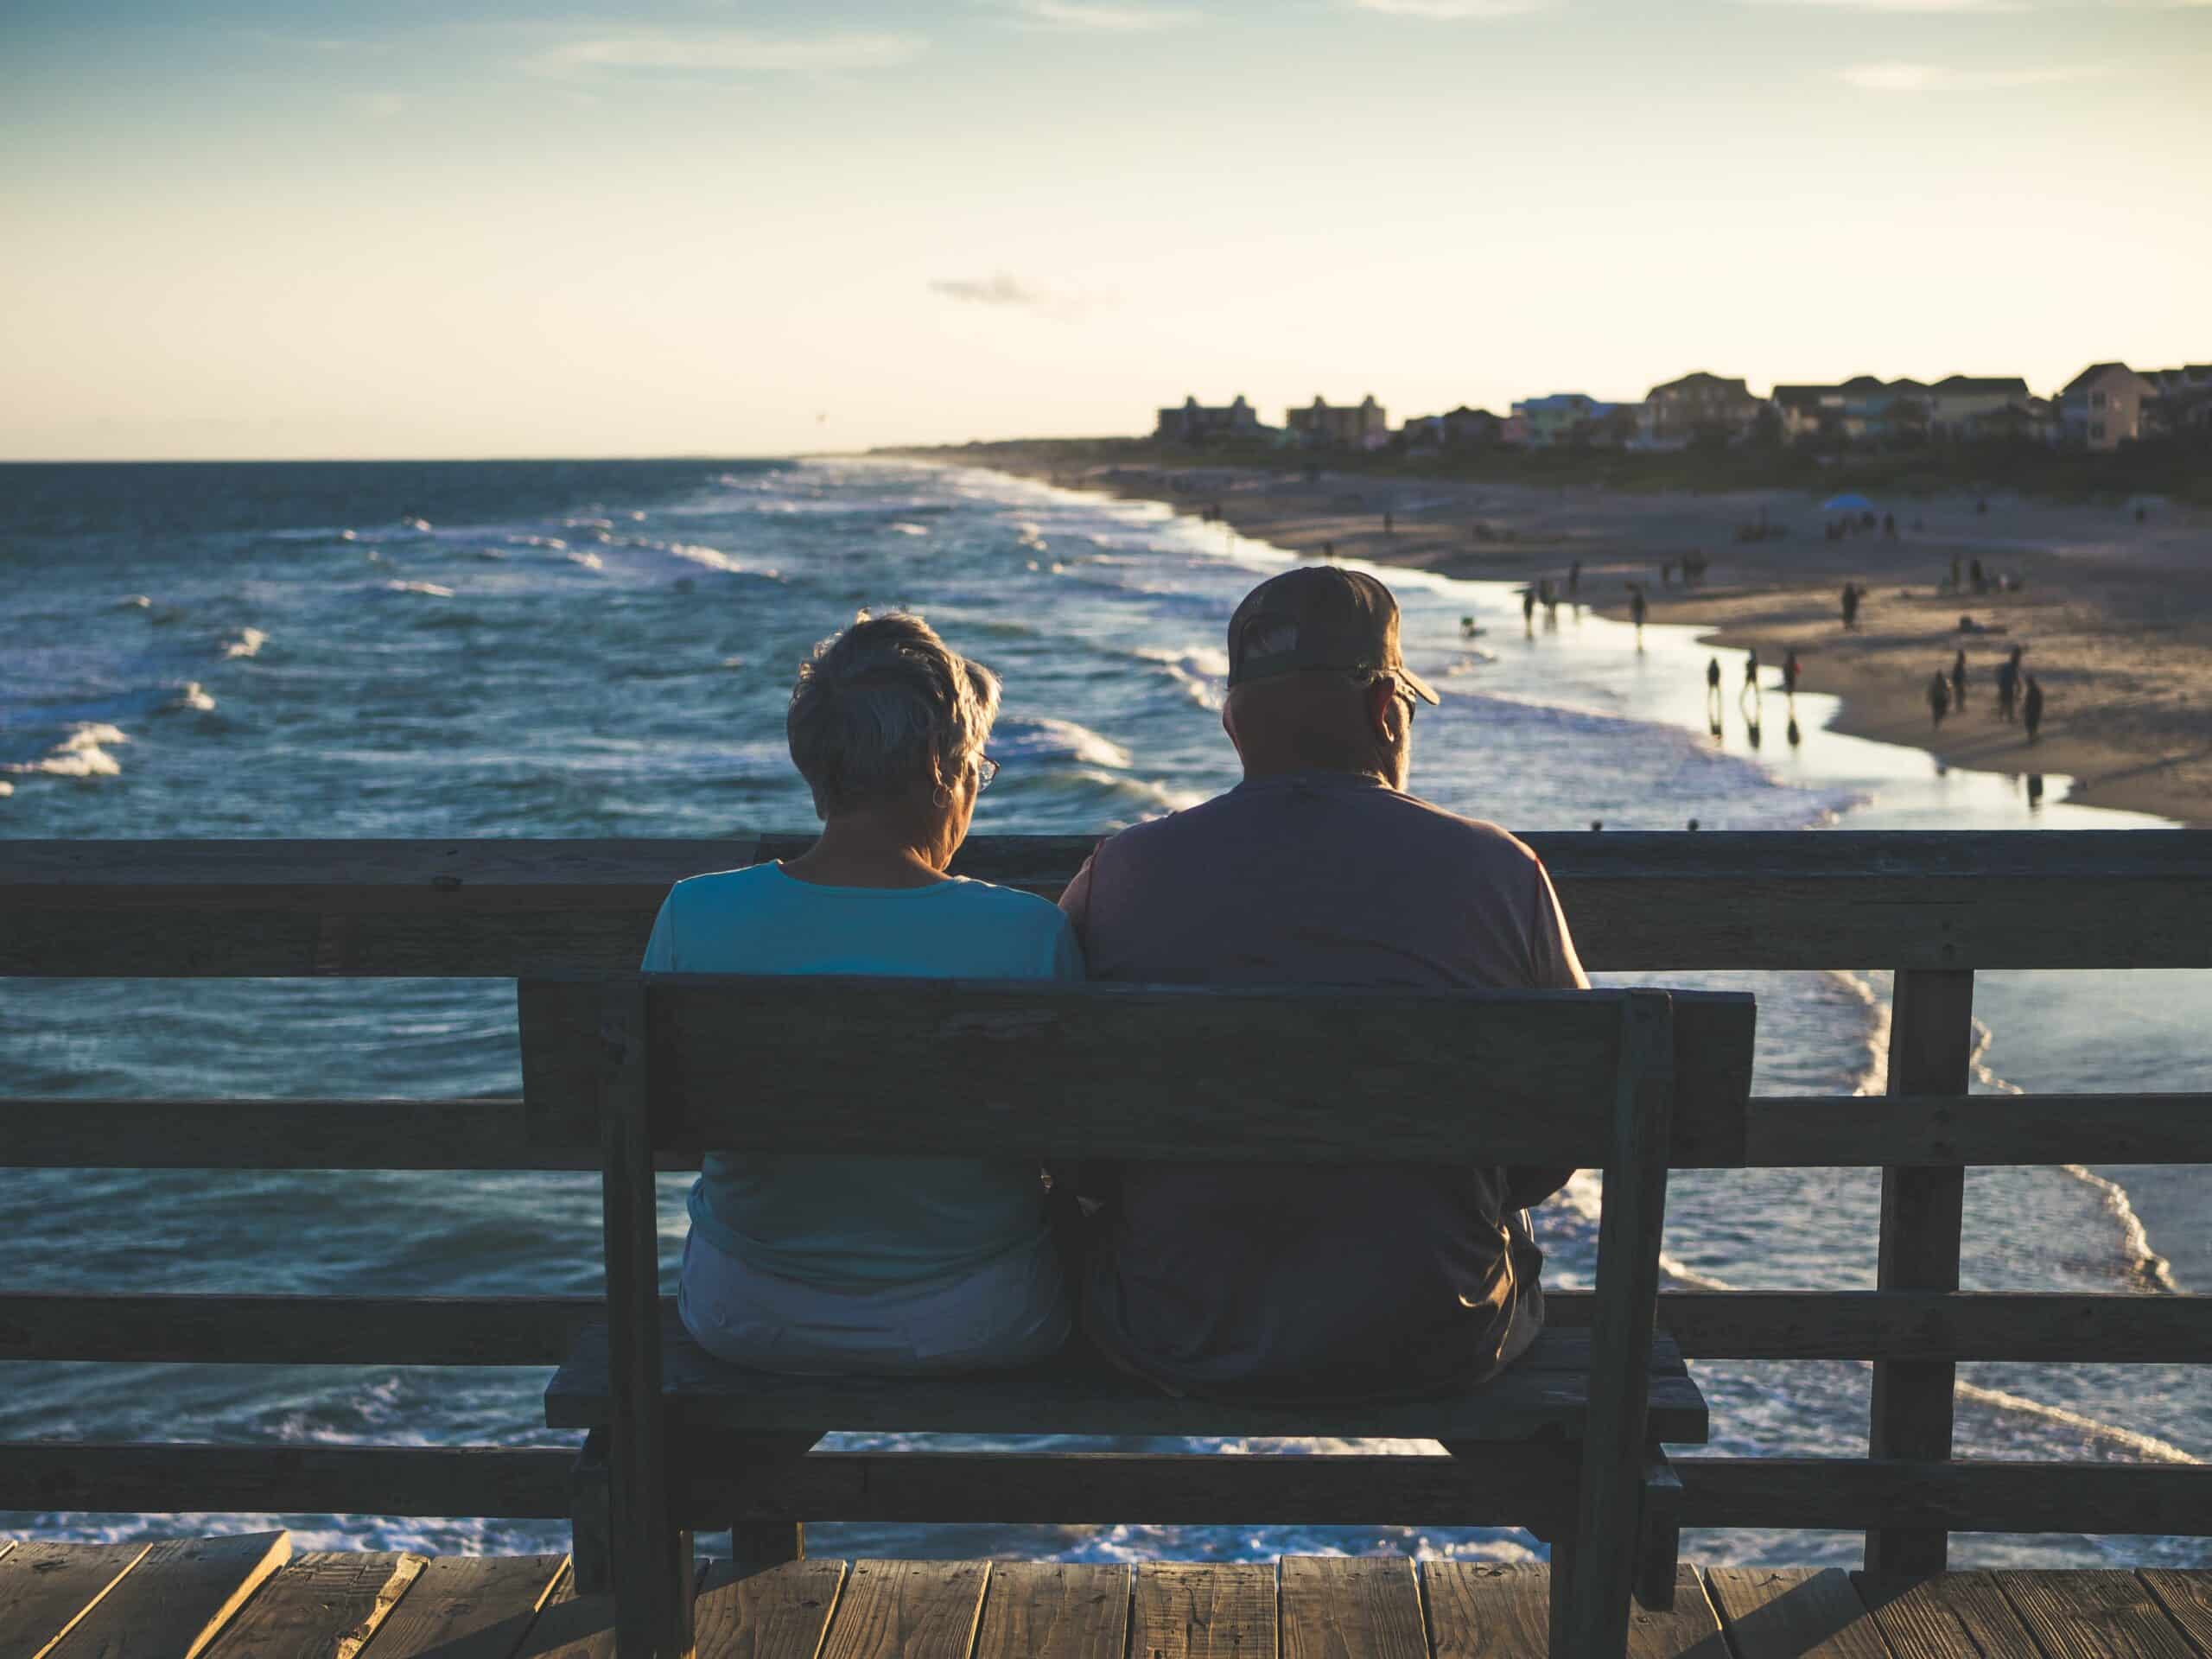 Retired couple, sitting on a bench on a pier, overlooking the ocean waves at almost sunset.